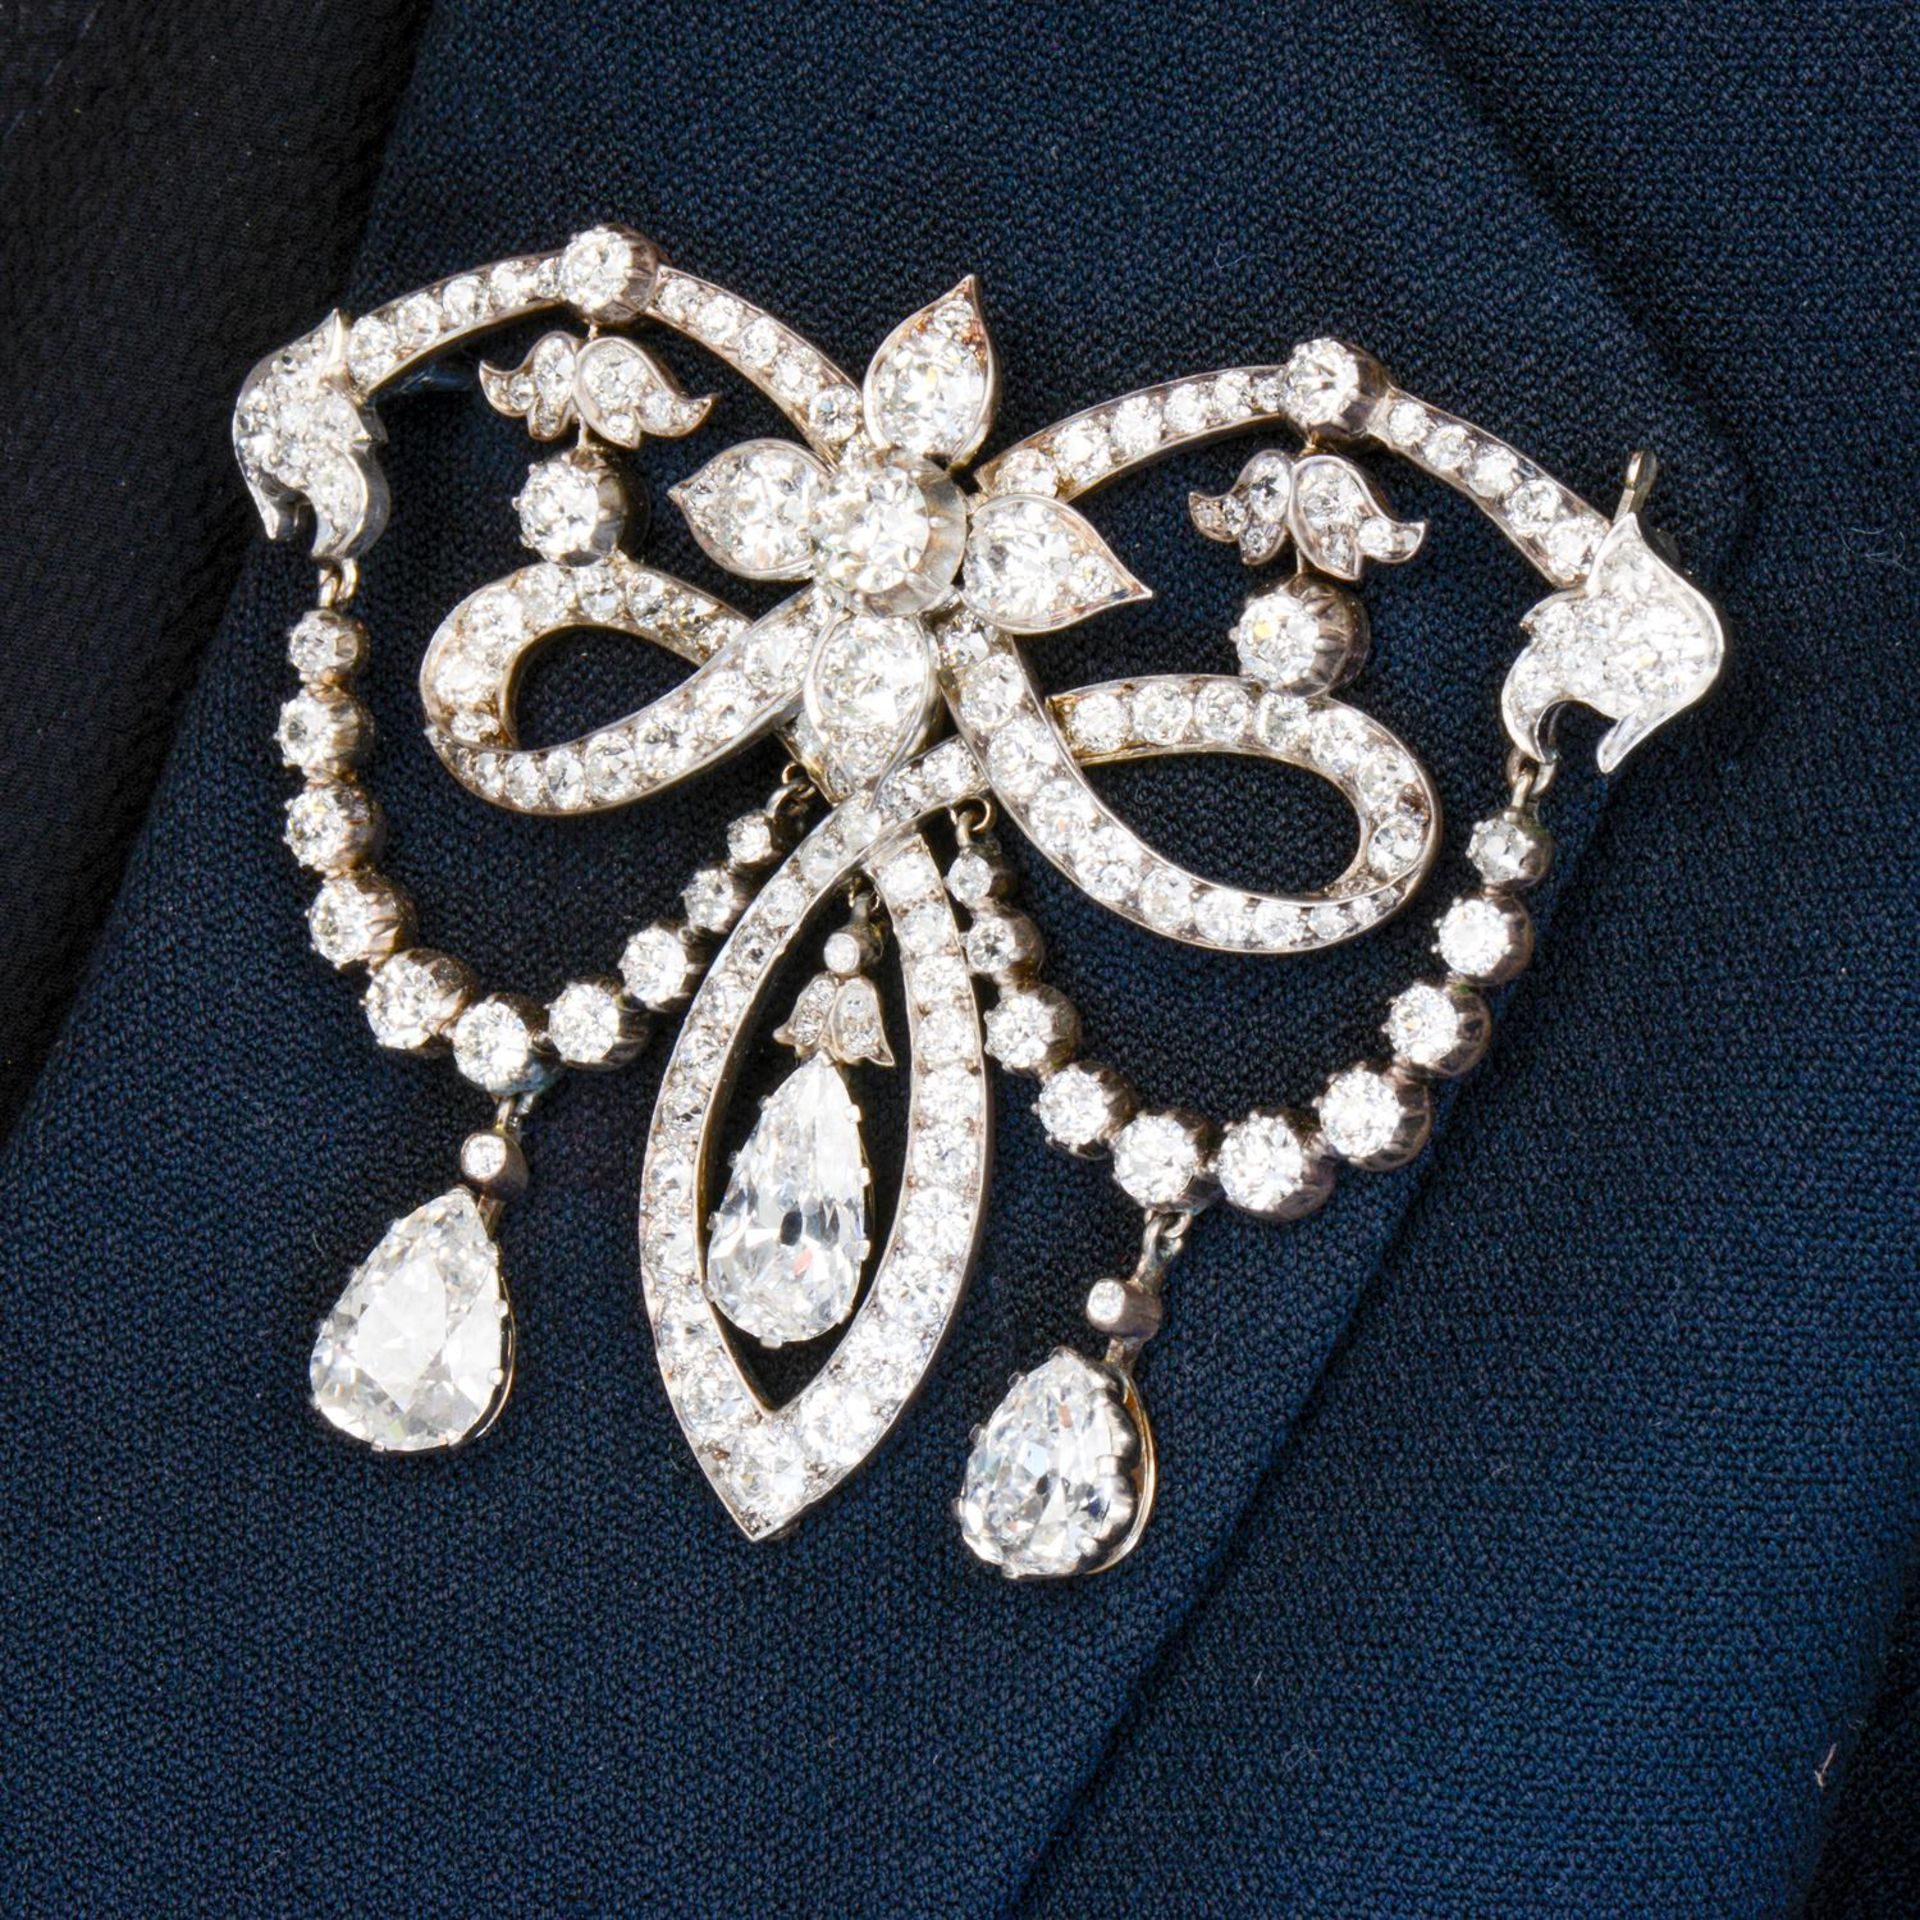 19th century silver and gold diamond brooch